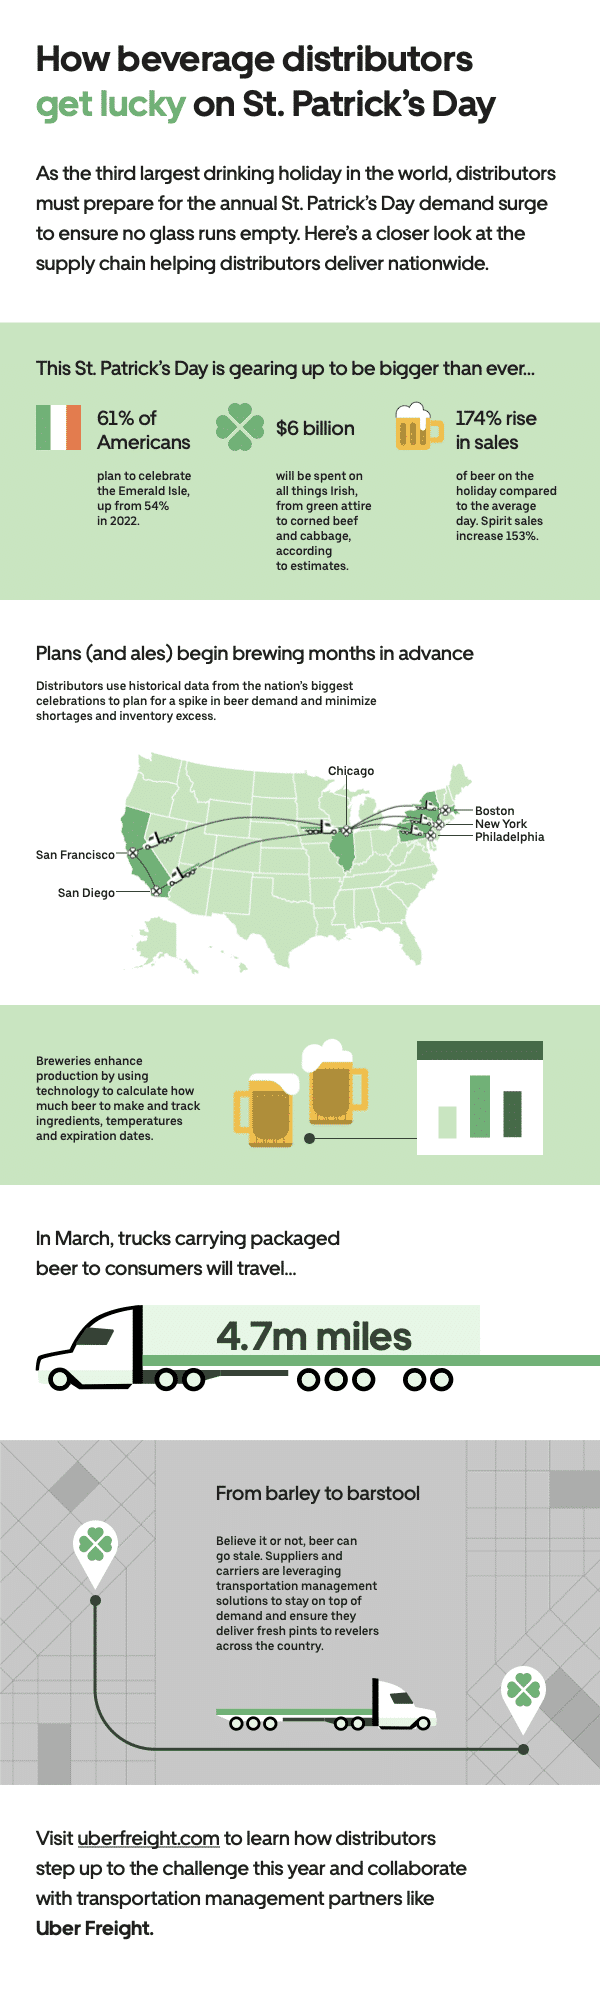 St. Patrick's Day - infographic